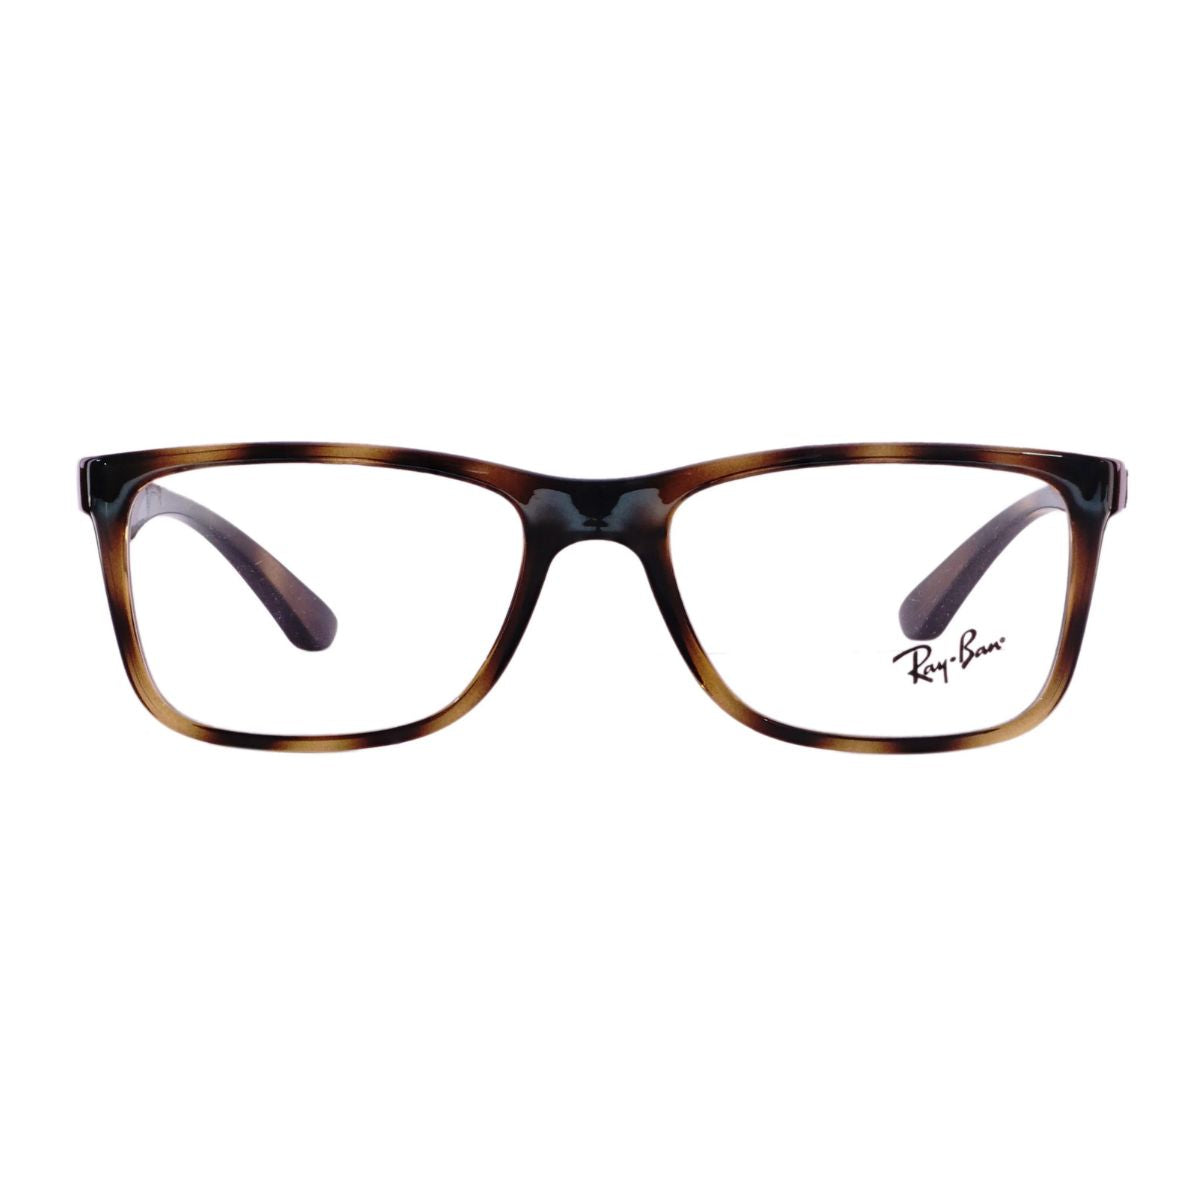 "shop Rayban 7027I 2012 square frame for men and women online at optororium"